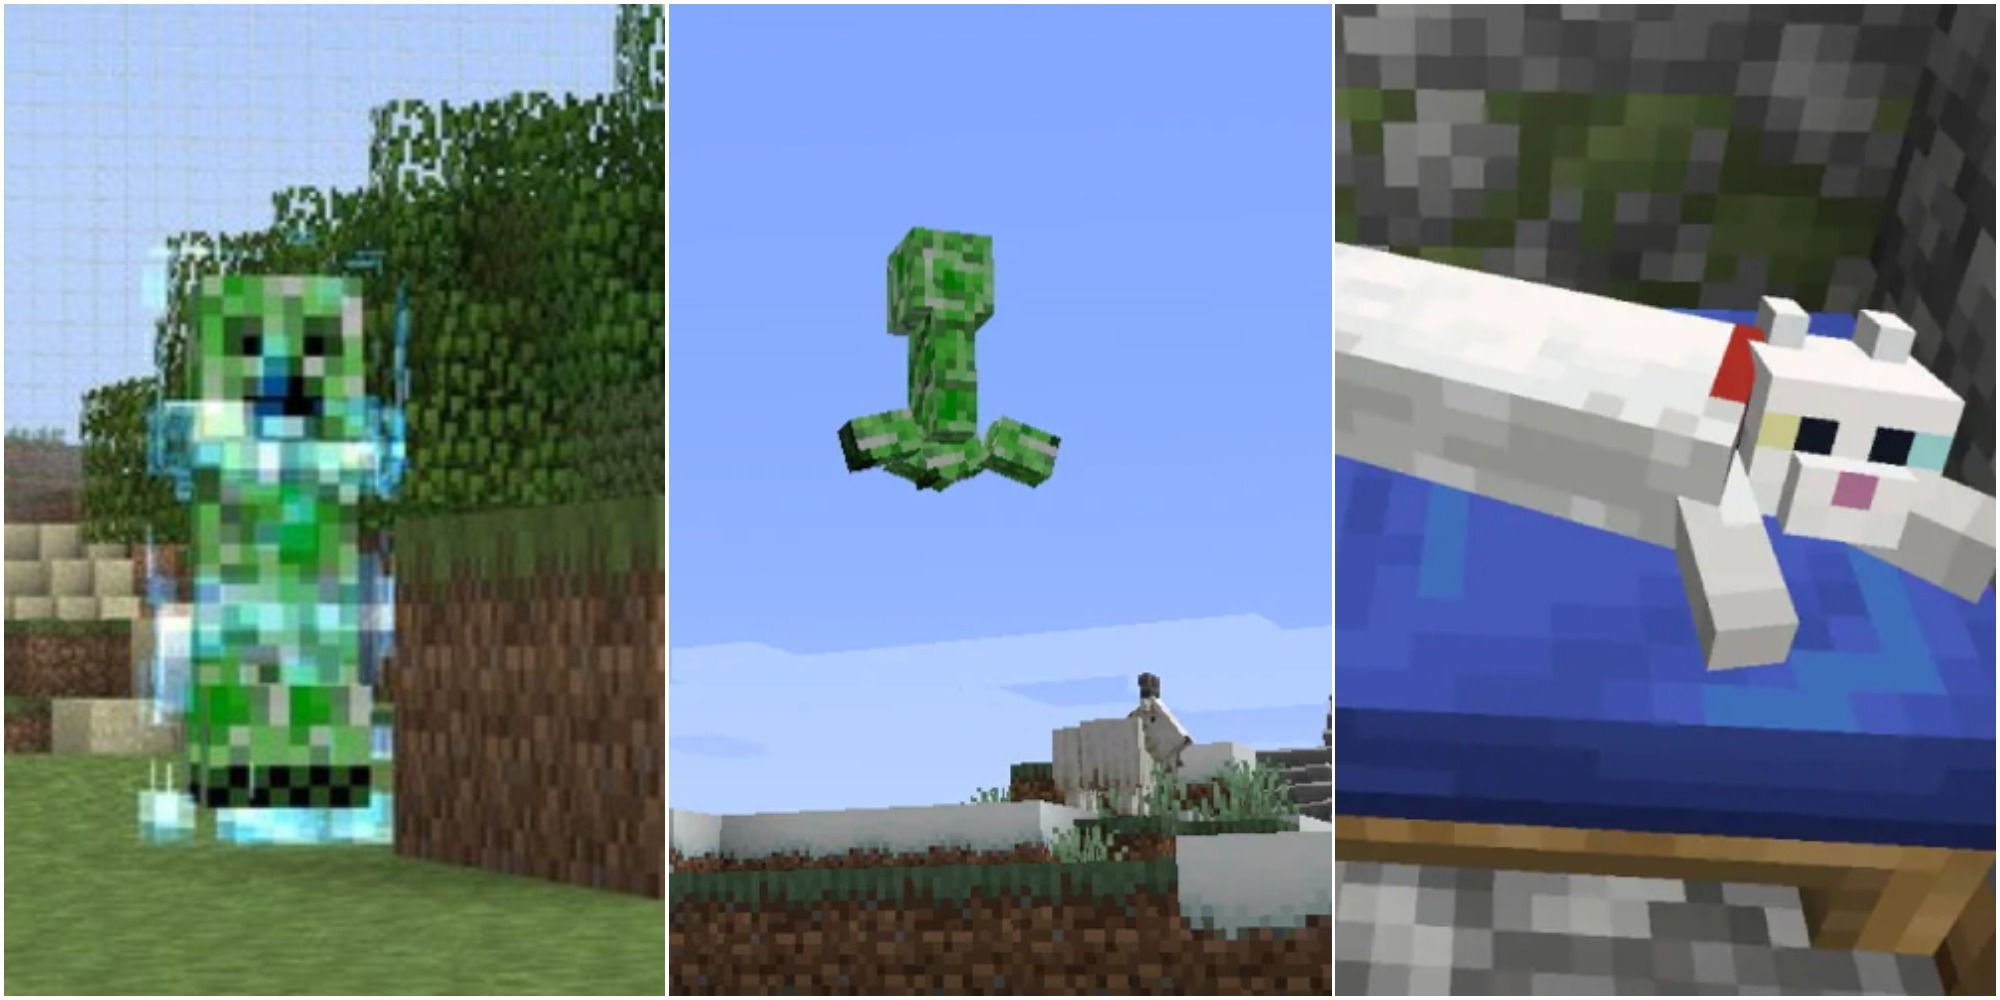 Real Life Creepers Terrify In Minecraft: The Last Minecart - Game Informer